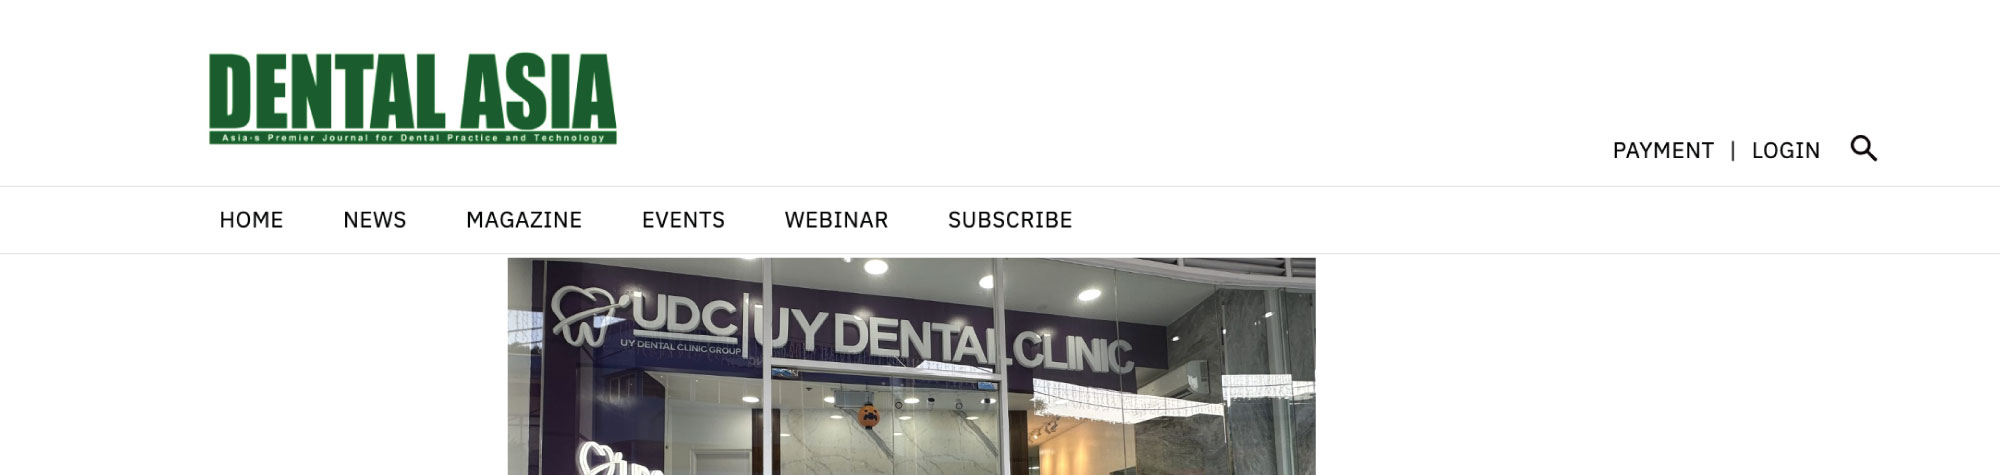 Oracare partners with Philippine-based Uy Dental Clinic Group